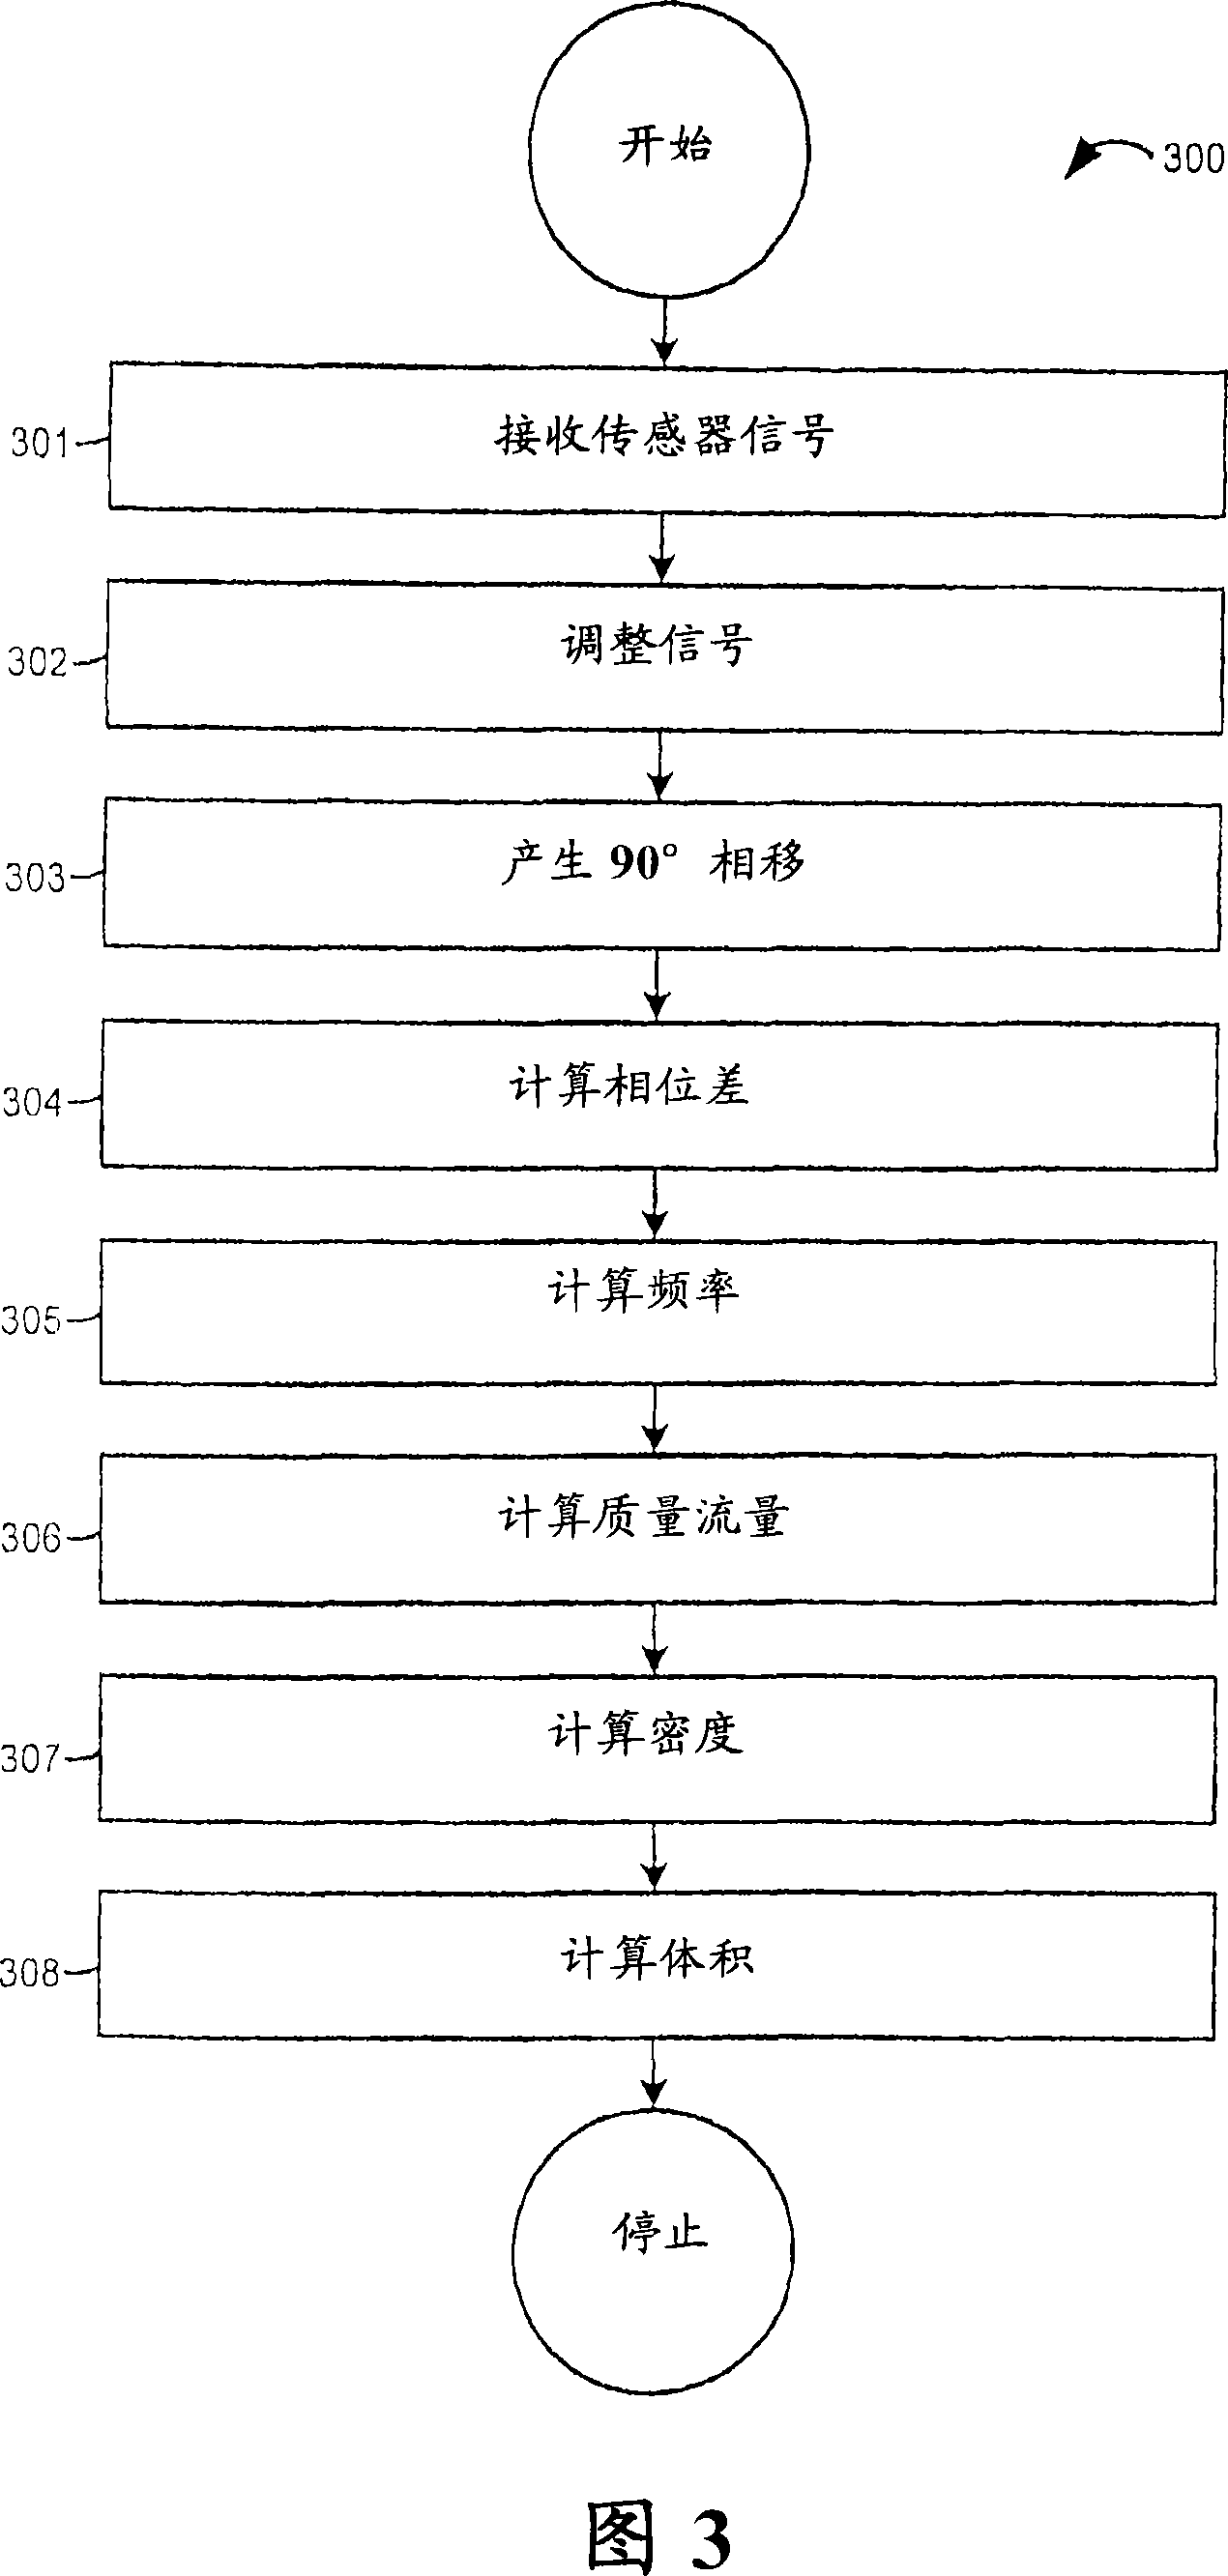 Methods and meter electronics for rapidly detecting a non-uniformity of a material flowing through a coriolis flowmeter